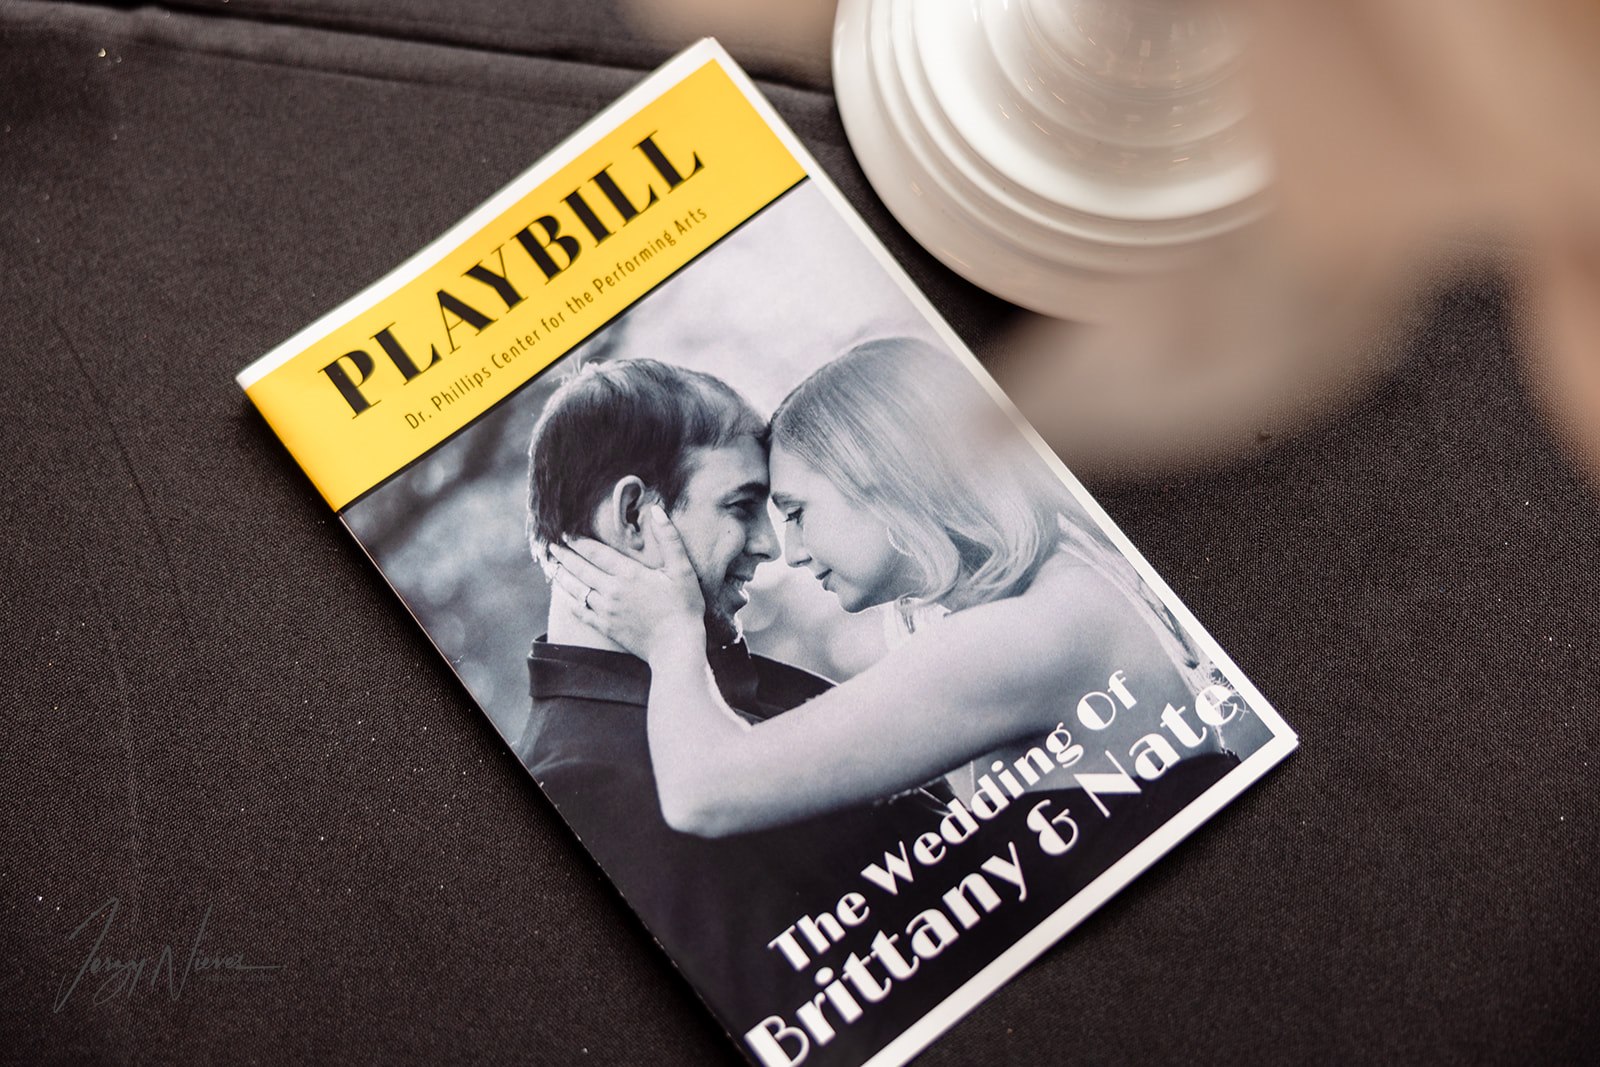 Special wedding playbill featuring the couple embracing on the cover, with the Dr. Phillips Center for the Performing Arts in the background.